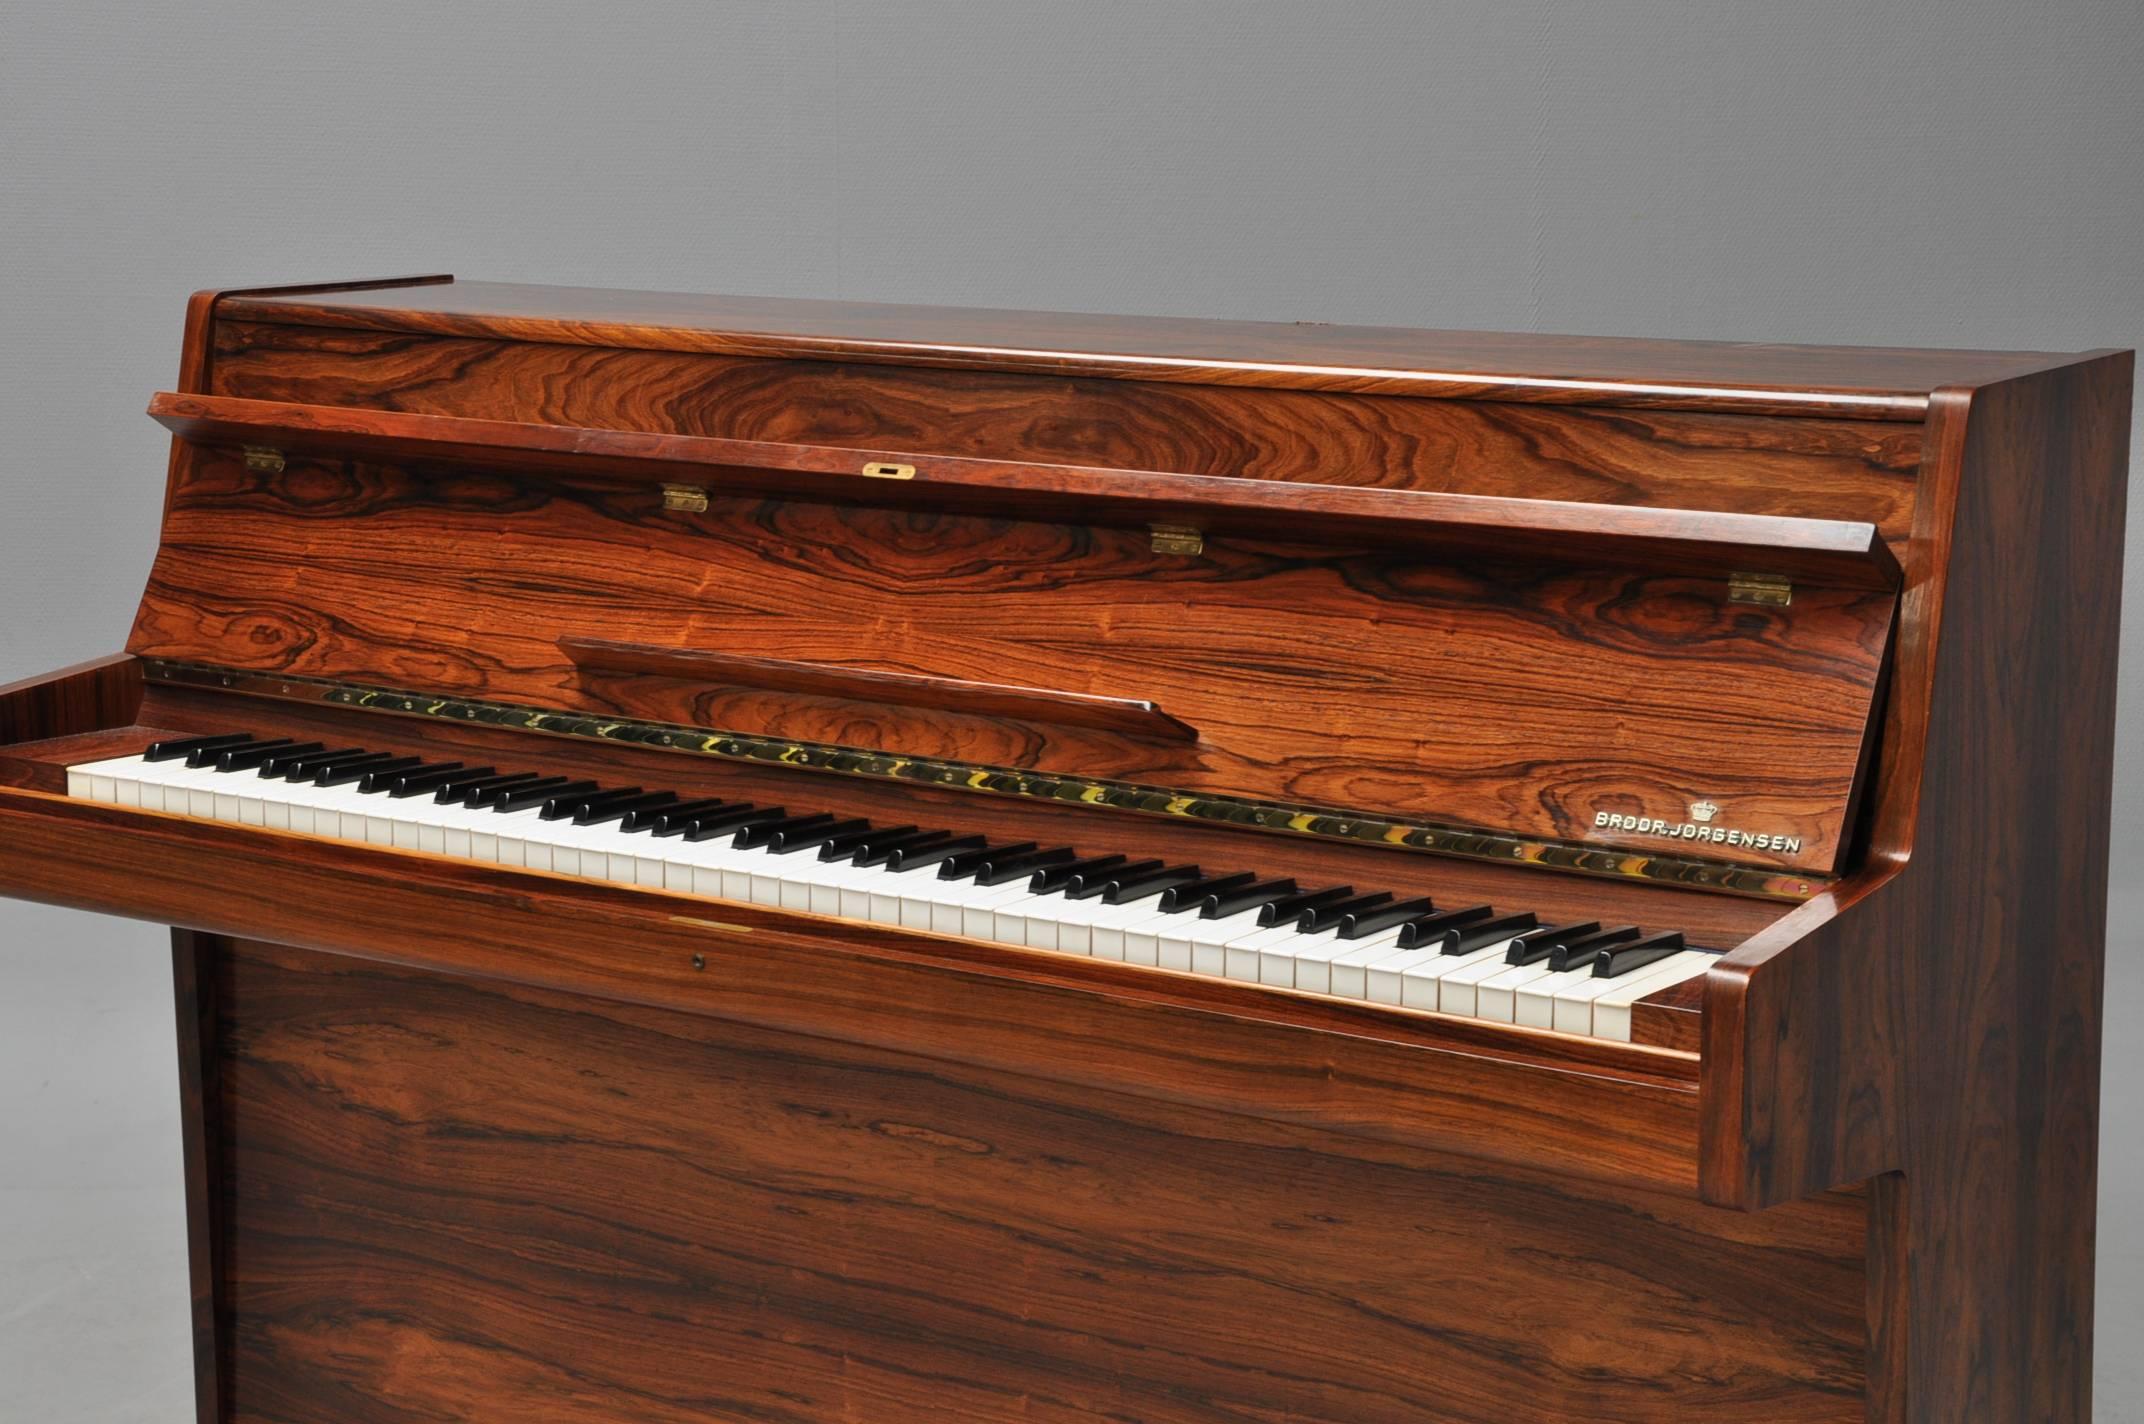 A rare art case Danish console piano of fine quality highly figured rosewood with decorative brass mount above keyboard. By Brodr. Jorgensen, late 1950s-early 1960s. A beautiful piano that works with antiques or modern furniture. This is not your